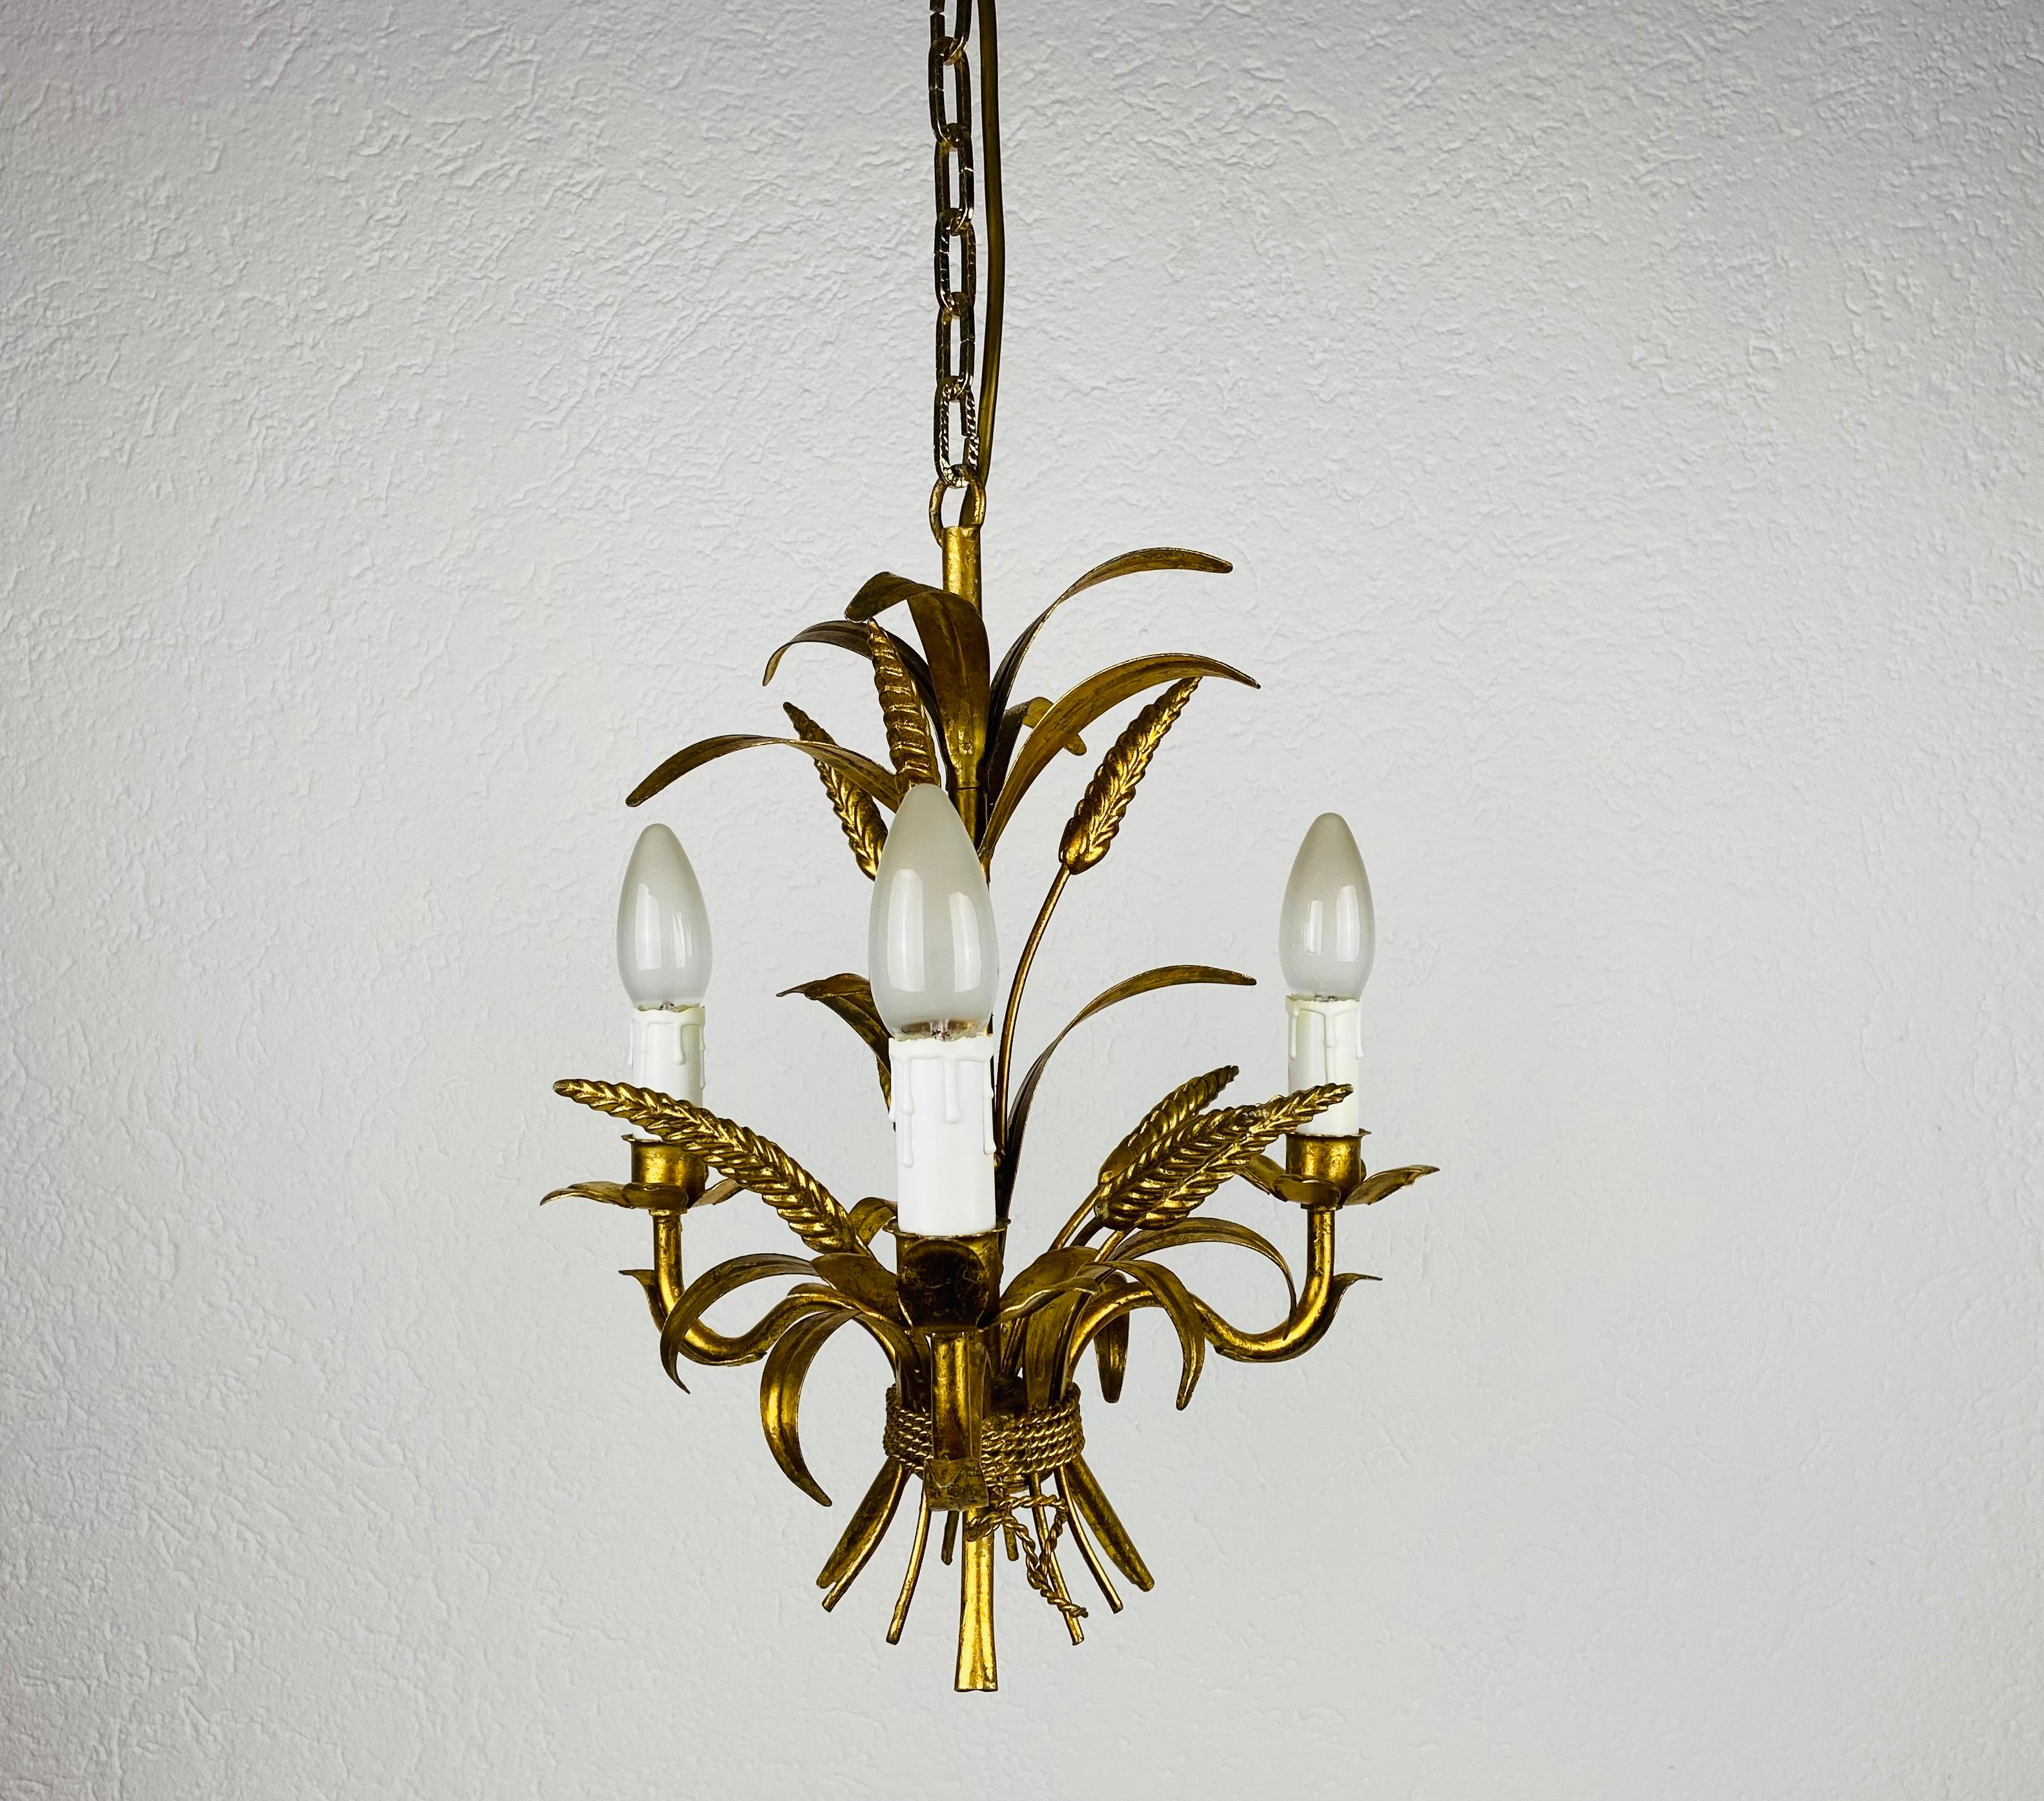 Golden Wheat Sheaf Pendant Lamp by Hans Kögl, Germany, 1970s For Sale 7